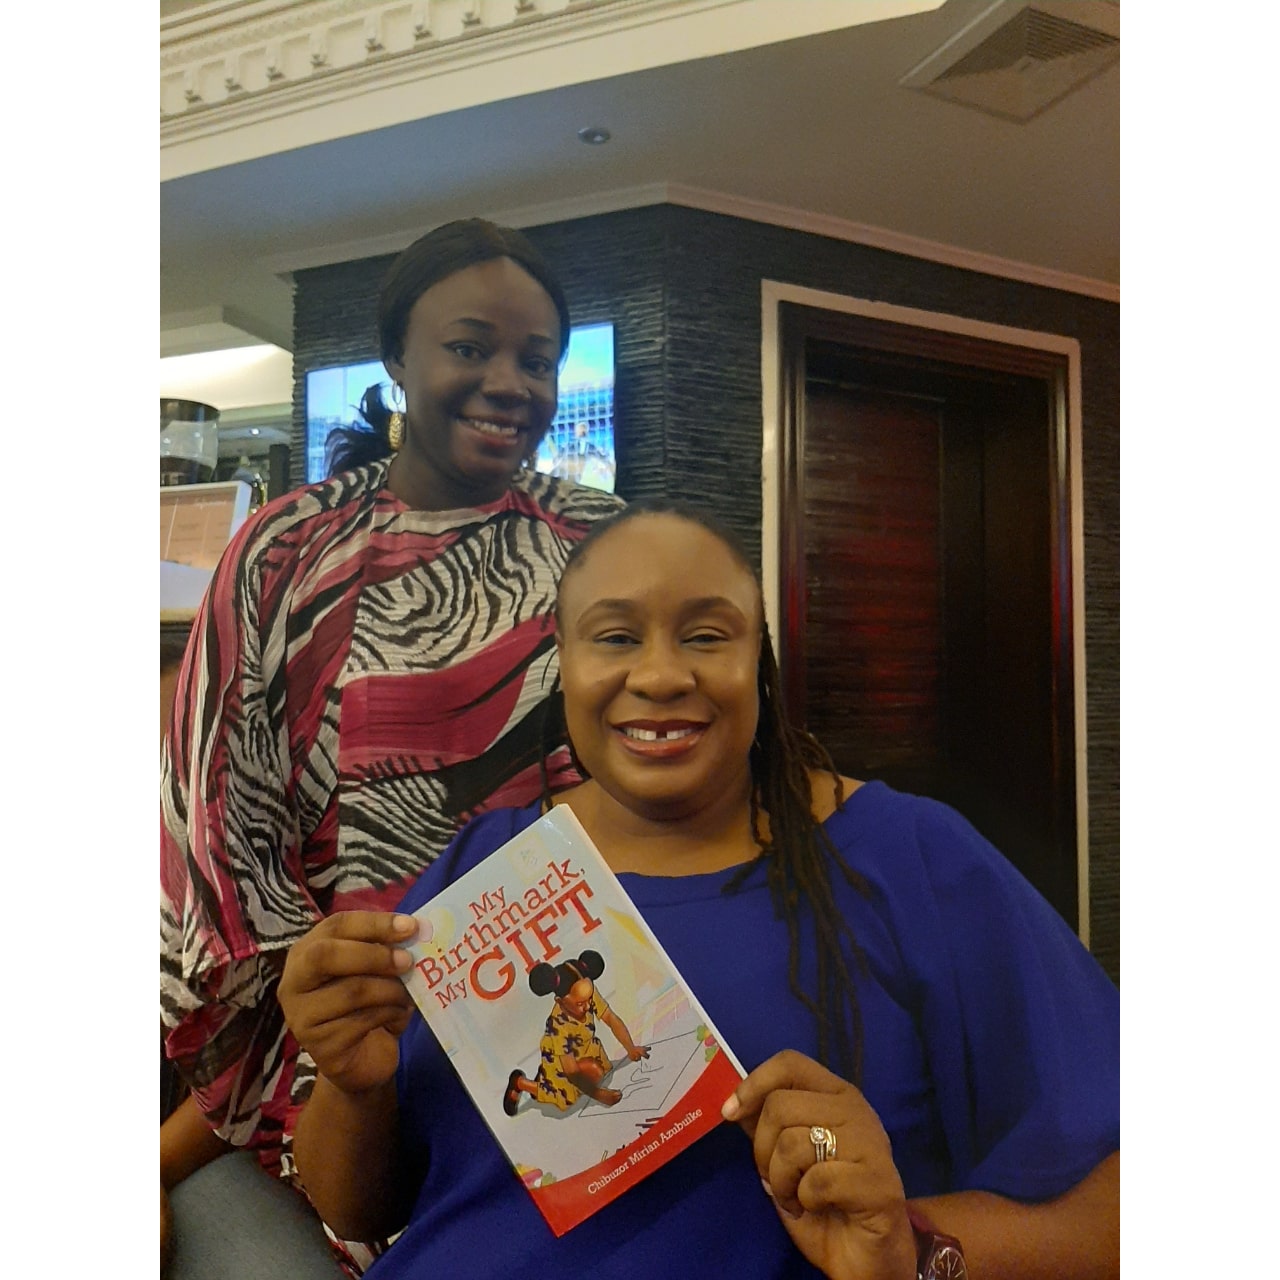 Me and Chioma Ifeanyi-Eze (CEO of AccountingHub) and a copy of my book